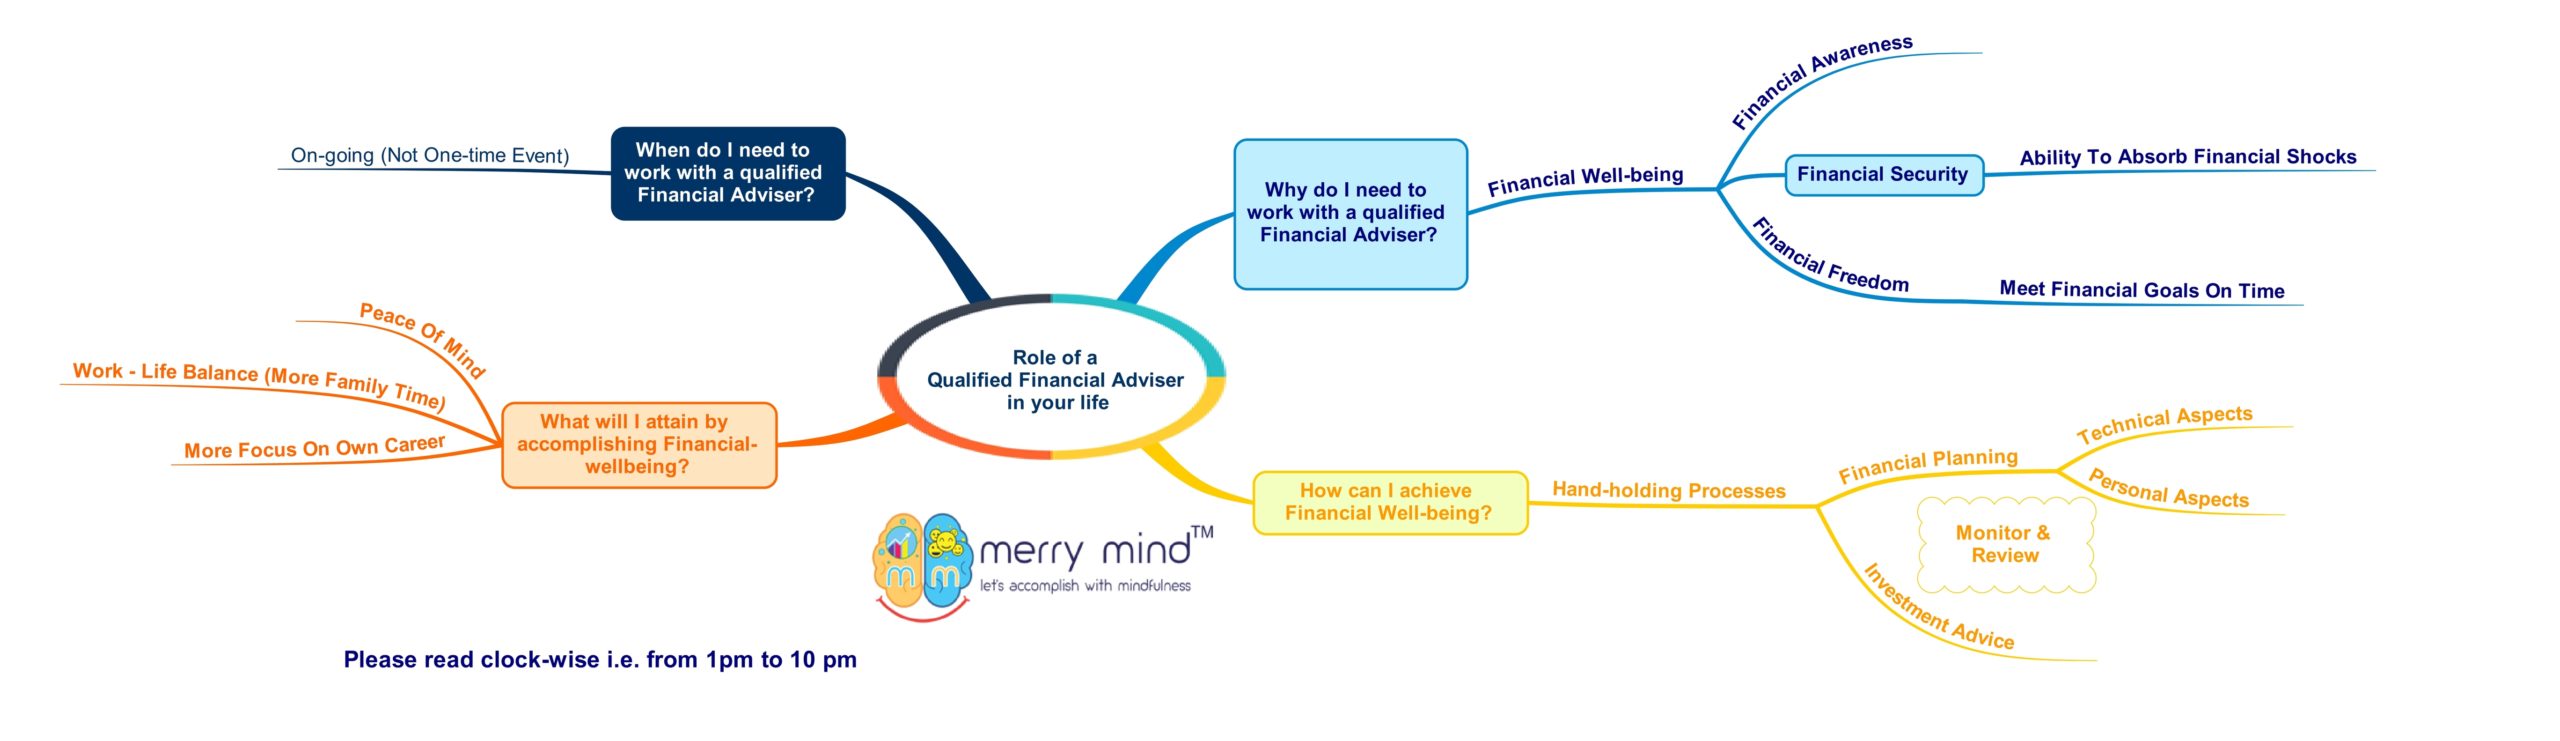 Role of a Qualified Financial Adviser in your life